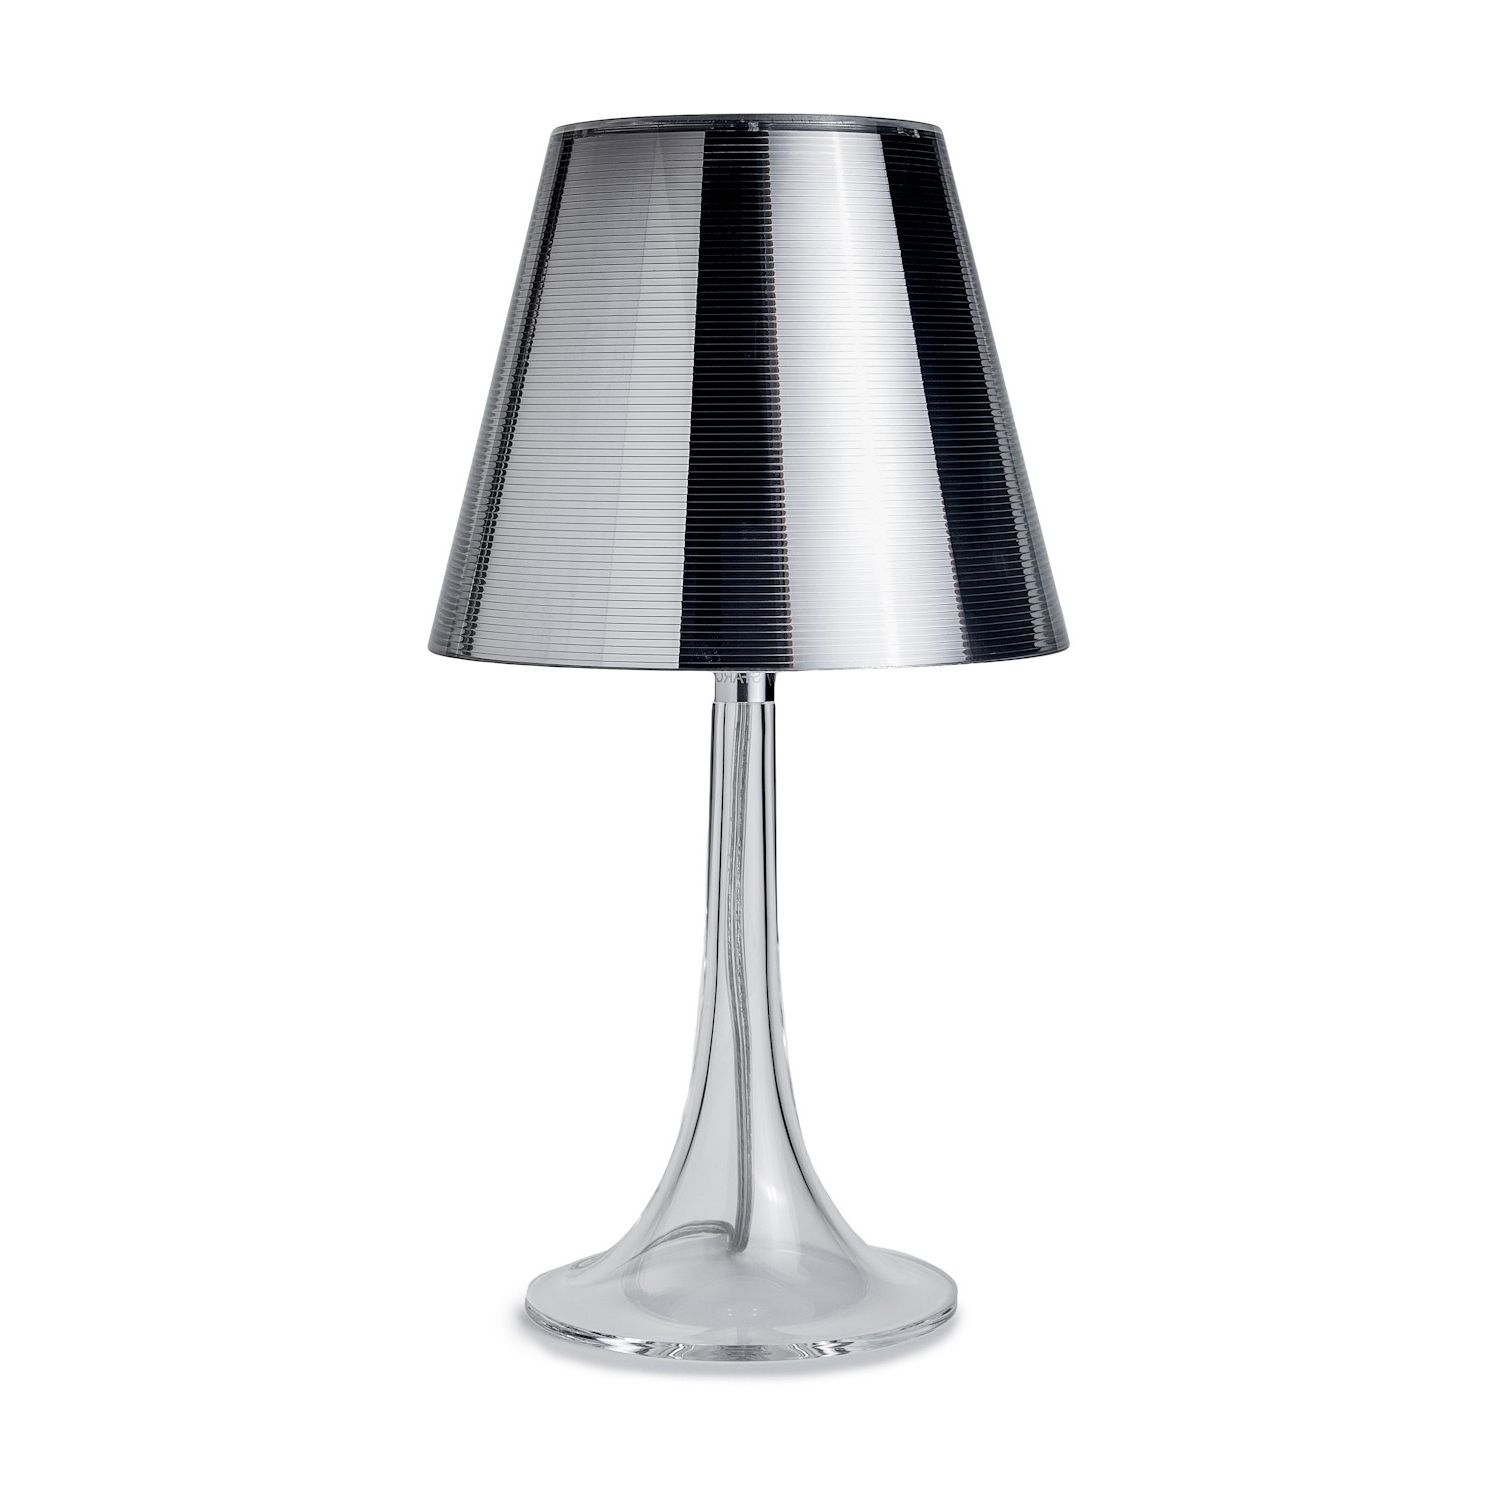 Widely Used John Lewis Table Lamps For Living Room Pertaining To Furniture : Contemporary Desk Lamps Office Magnificent Table John (View 12 of 20)